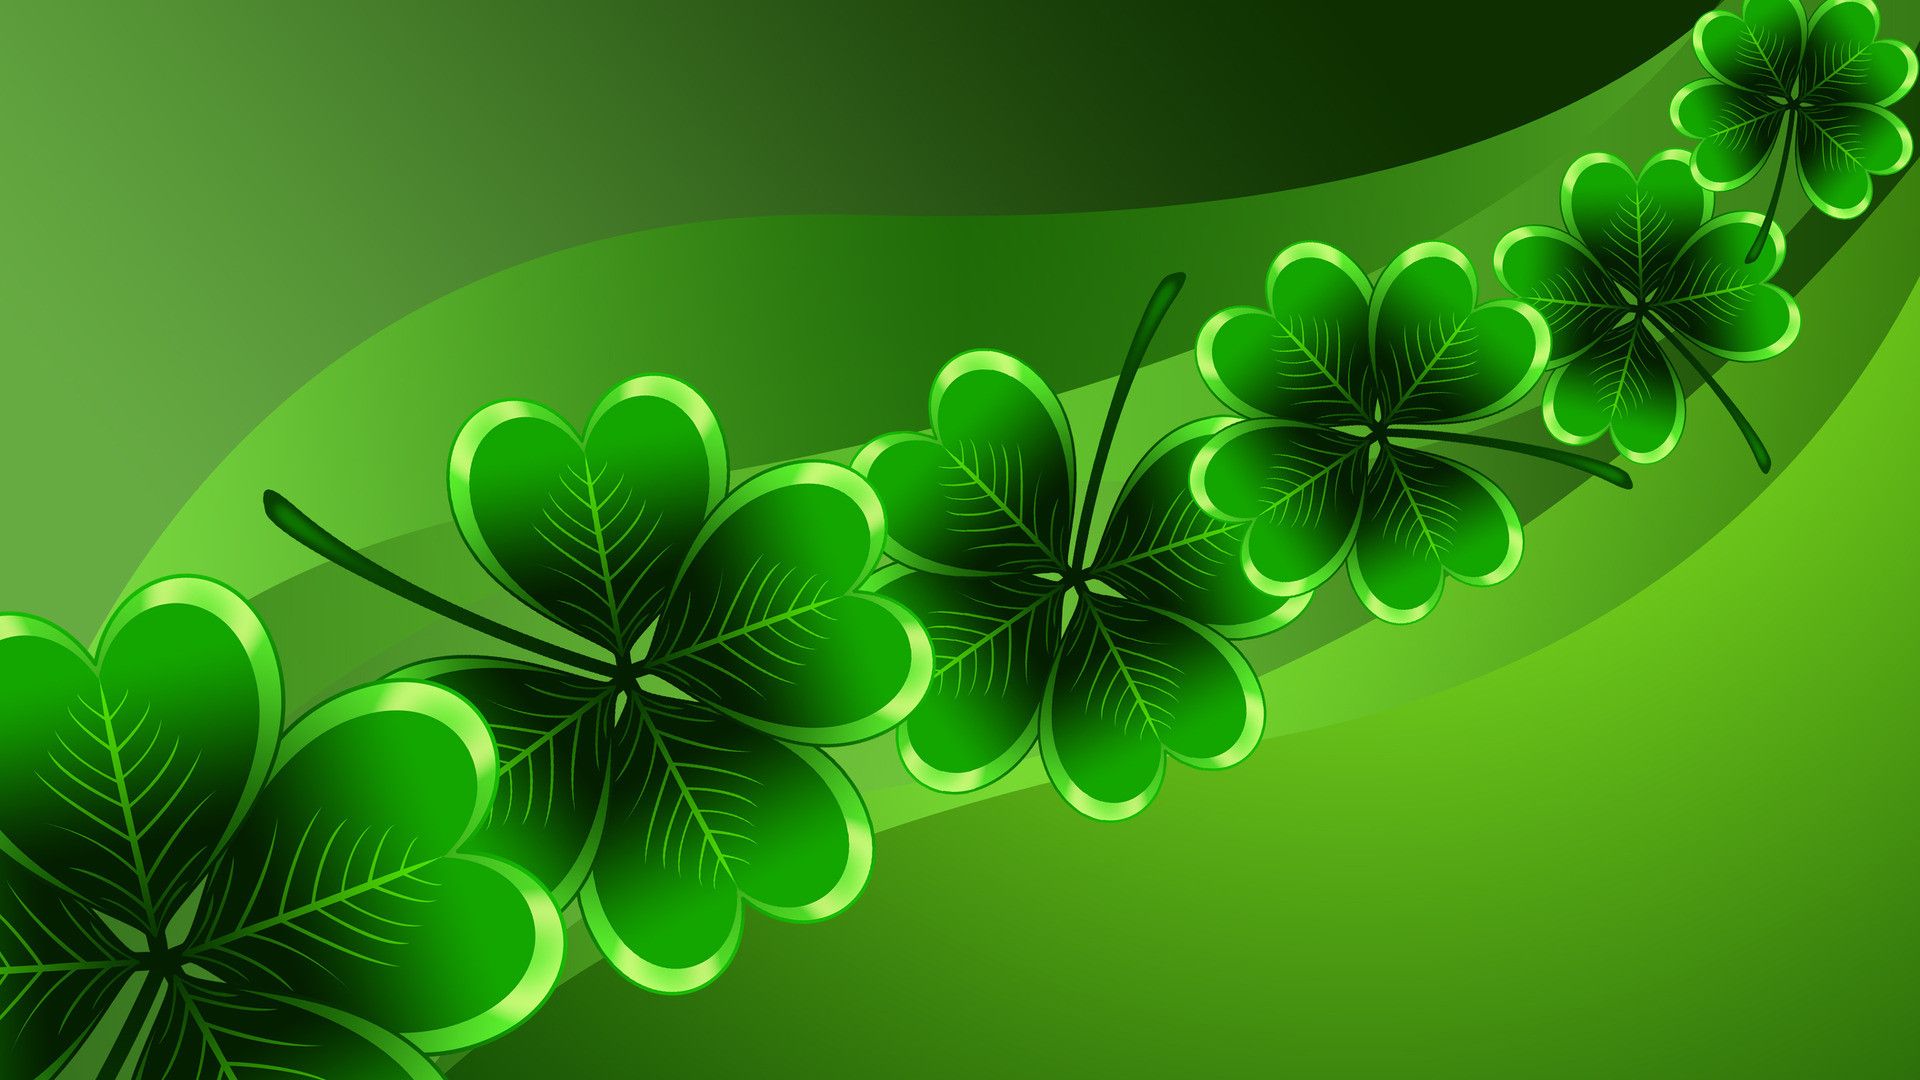 St Patricks Day Green Alfalfa Background St Patricks Day Alfalfa Background  Background Image And Wallpaper for Free Download